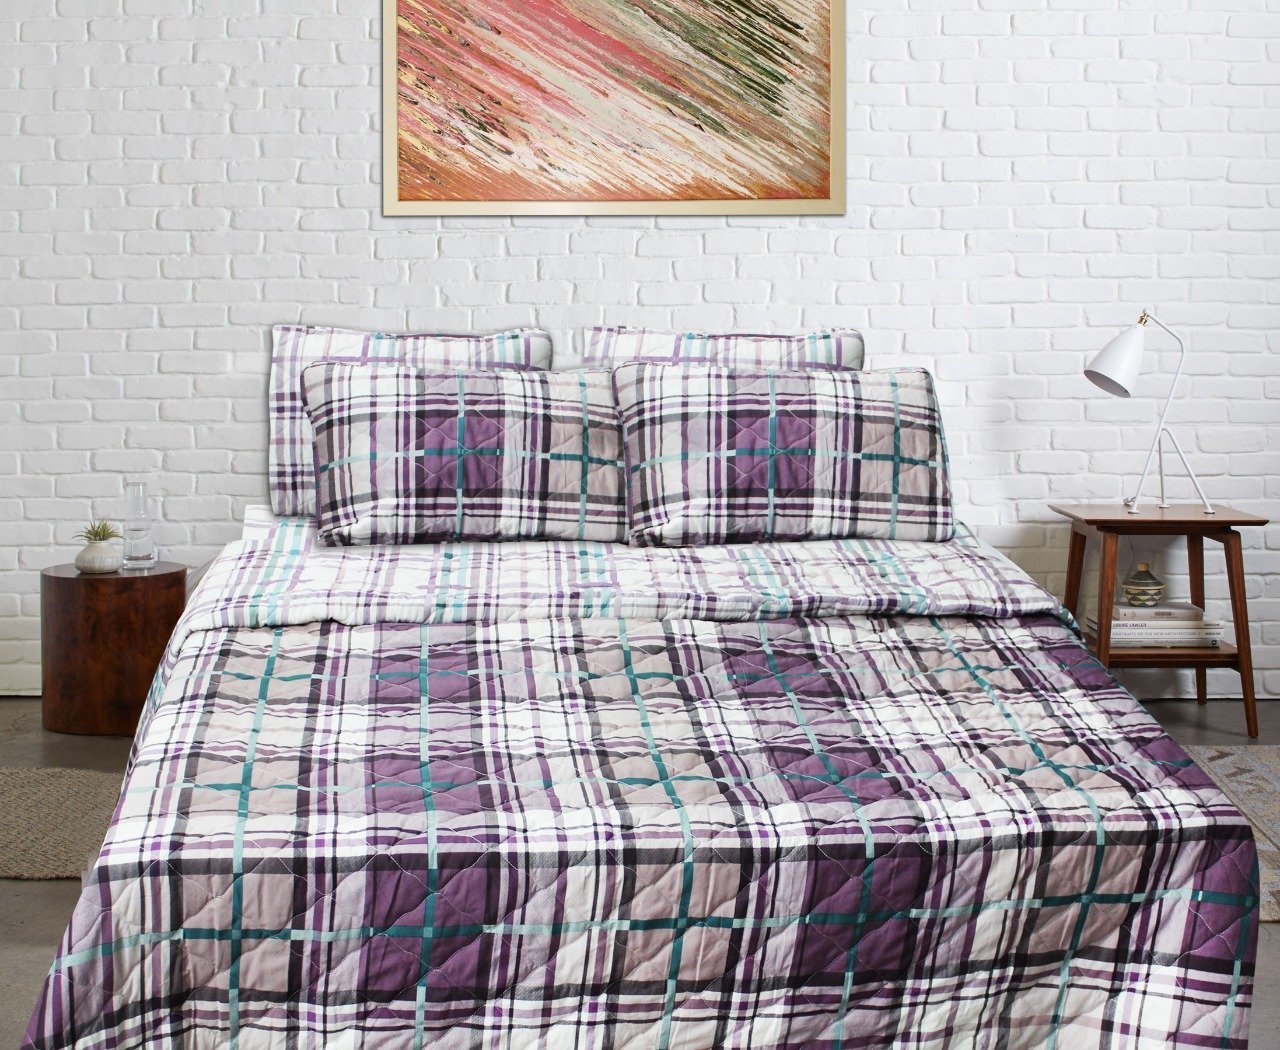 Export Quality Cotton Bed Spread Set - 6 pcs - Chequered - waseeh.com